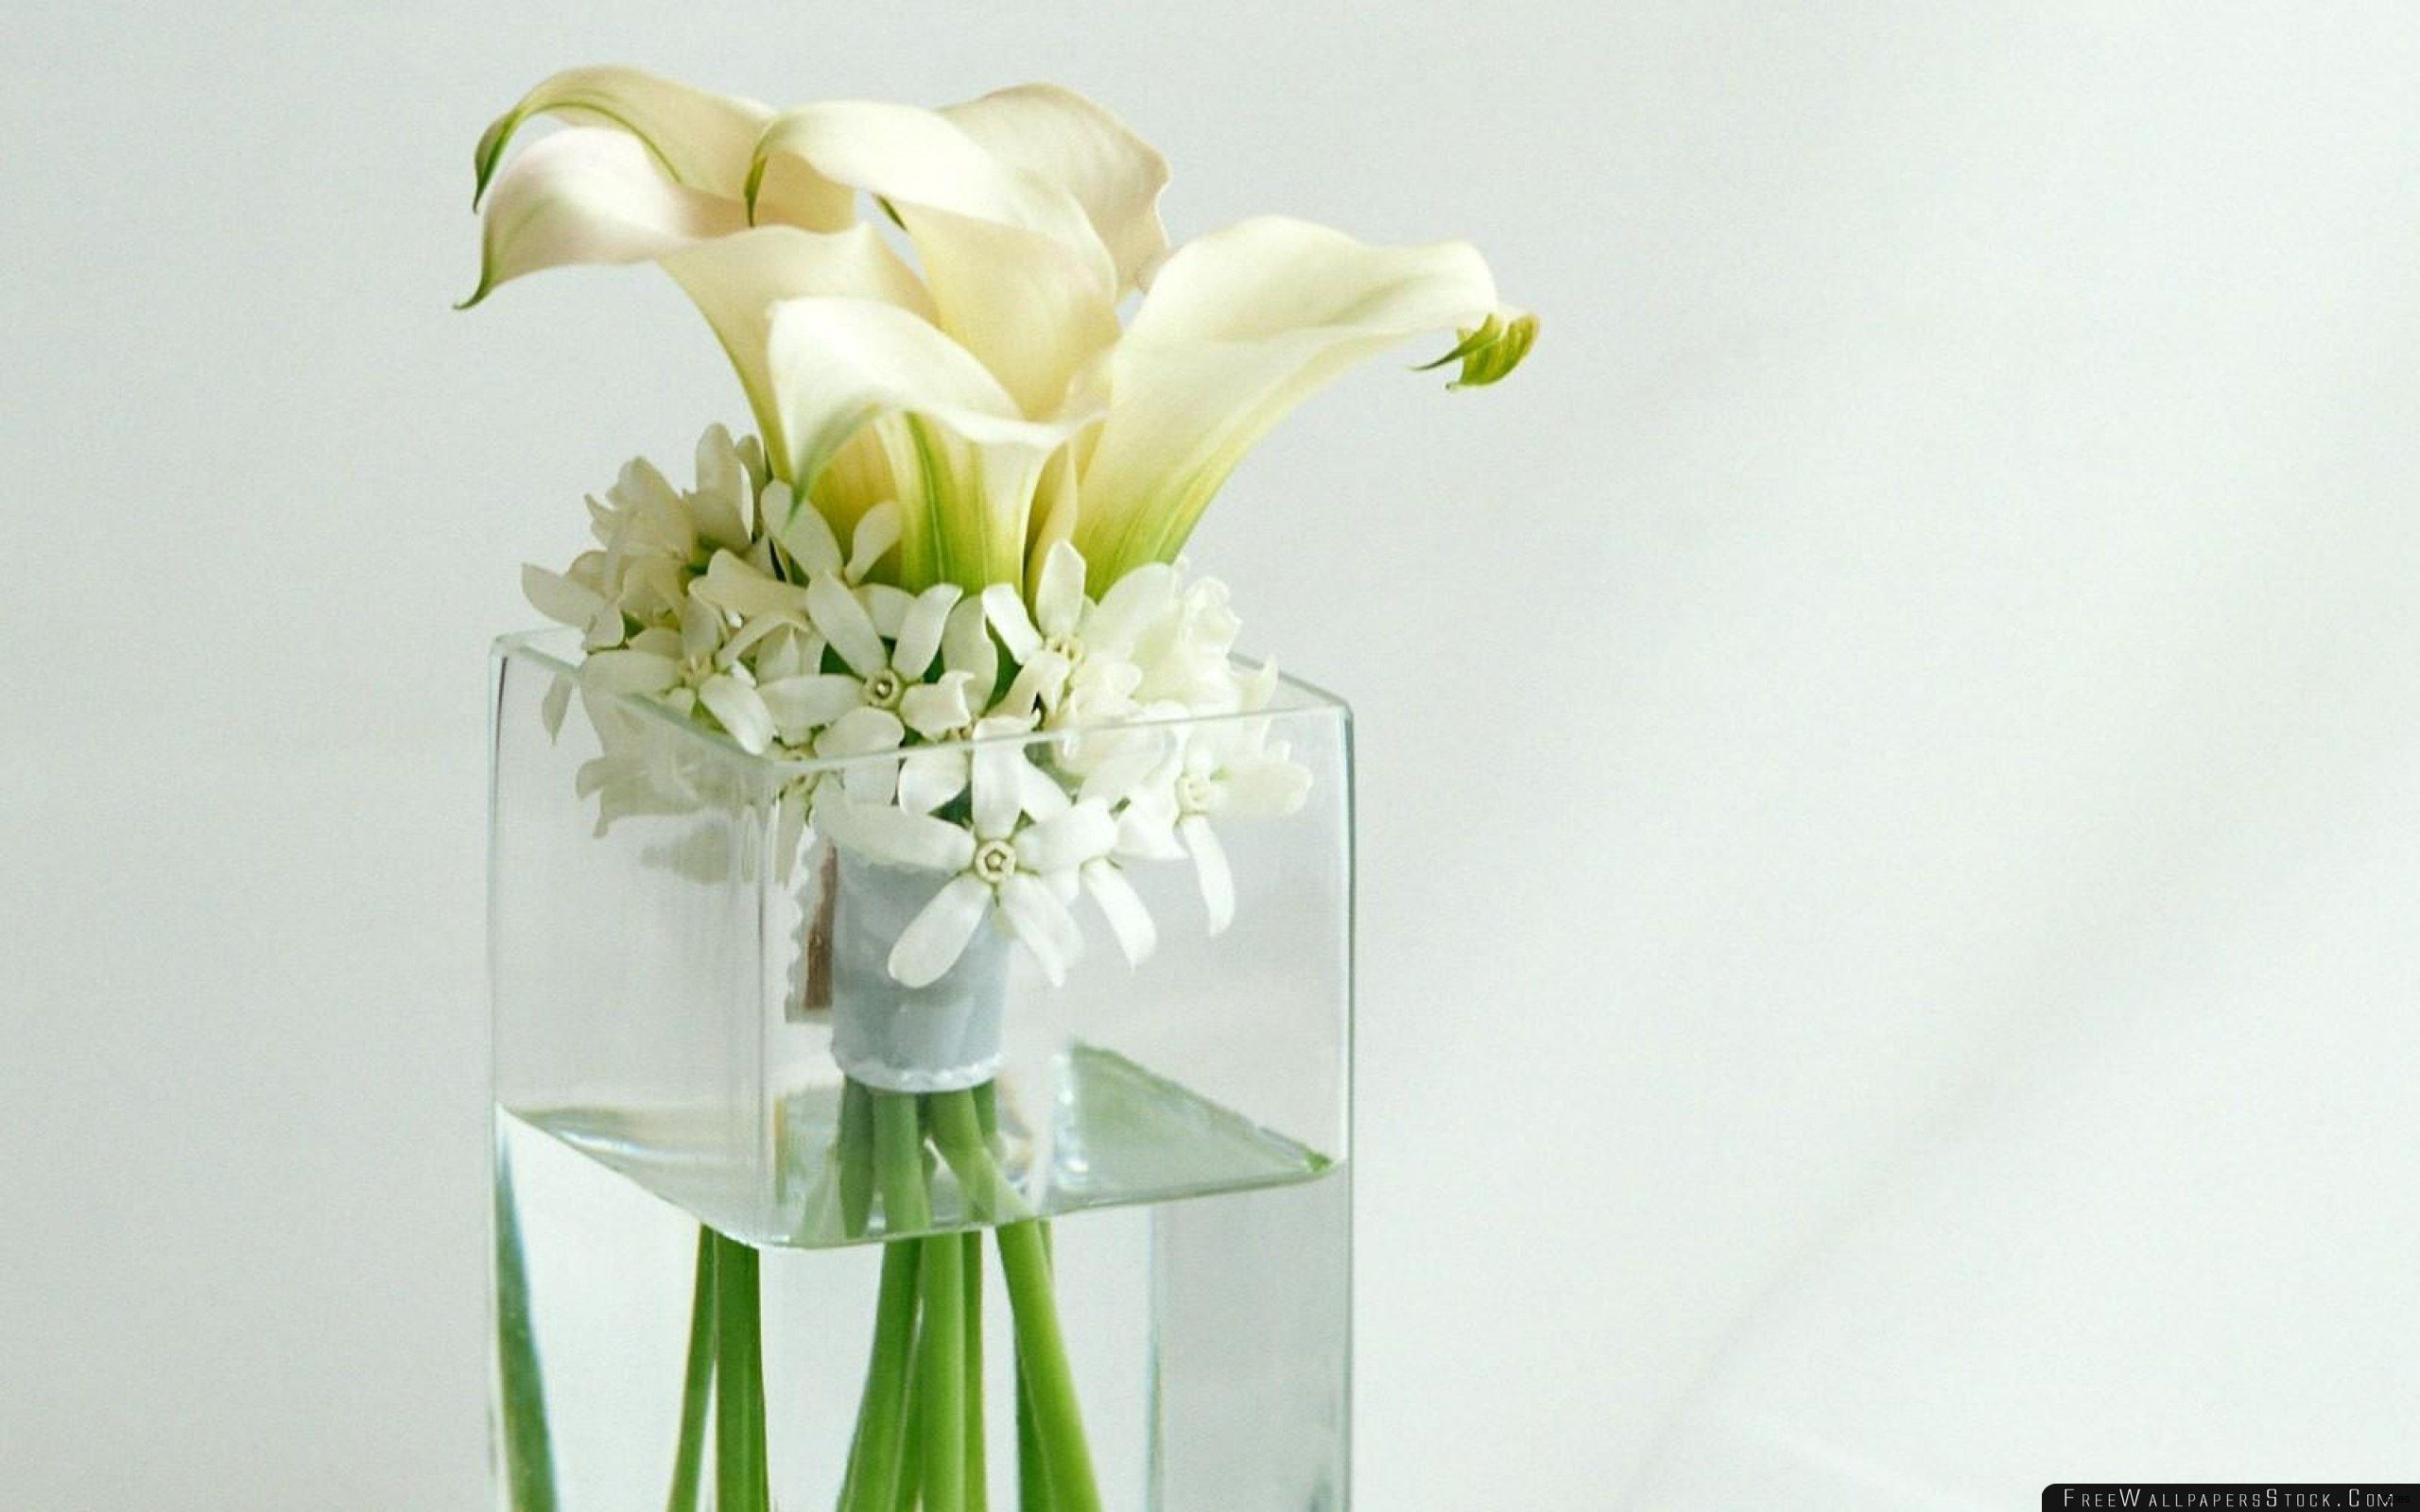 11 Amazing White Flower Vases for Weddings 2024 free download white flower vases for weddings of flowers in glass vase new tall vase centerpiece ideas vases flowers with regard to flowers in glass vase new tall vase centerpiece ideas vases flowers in w